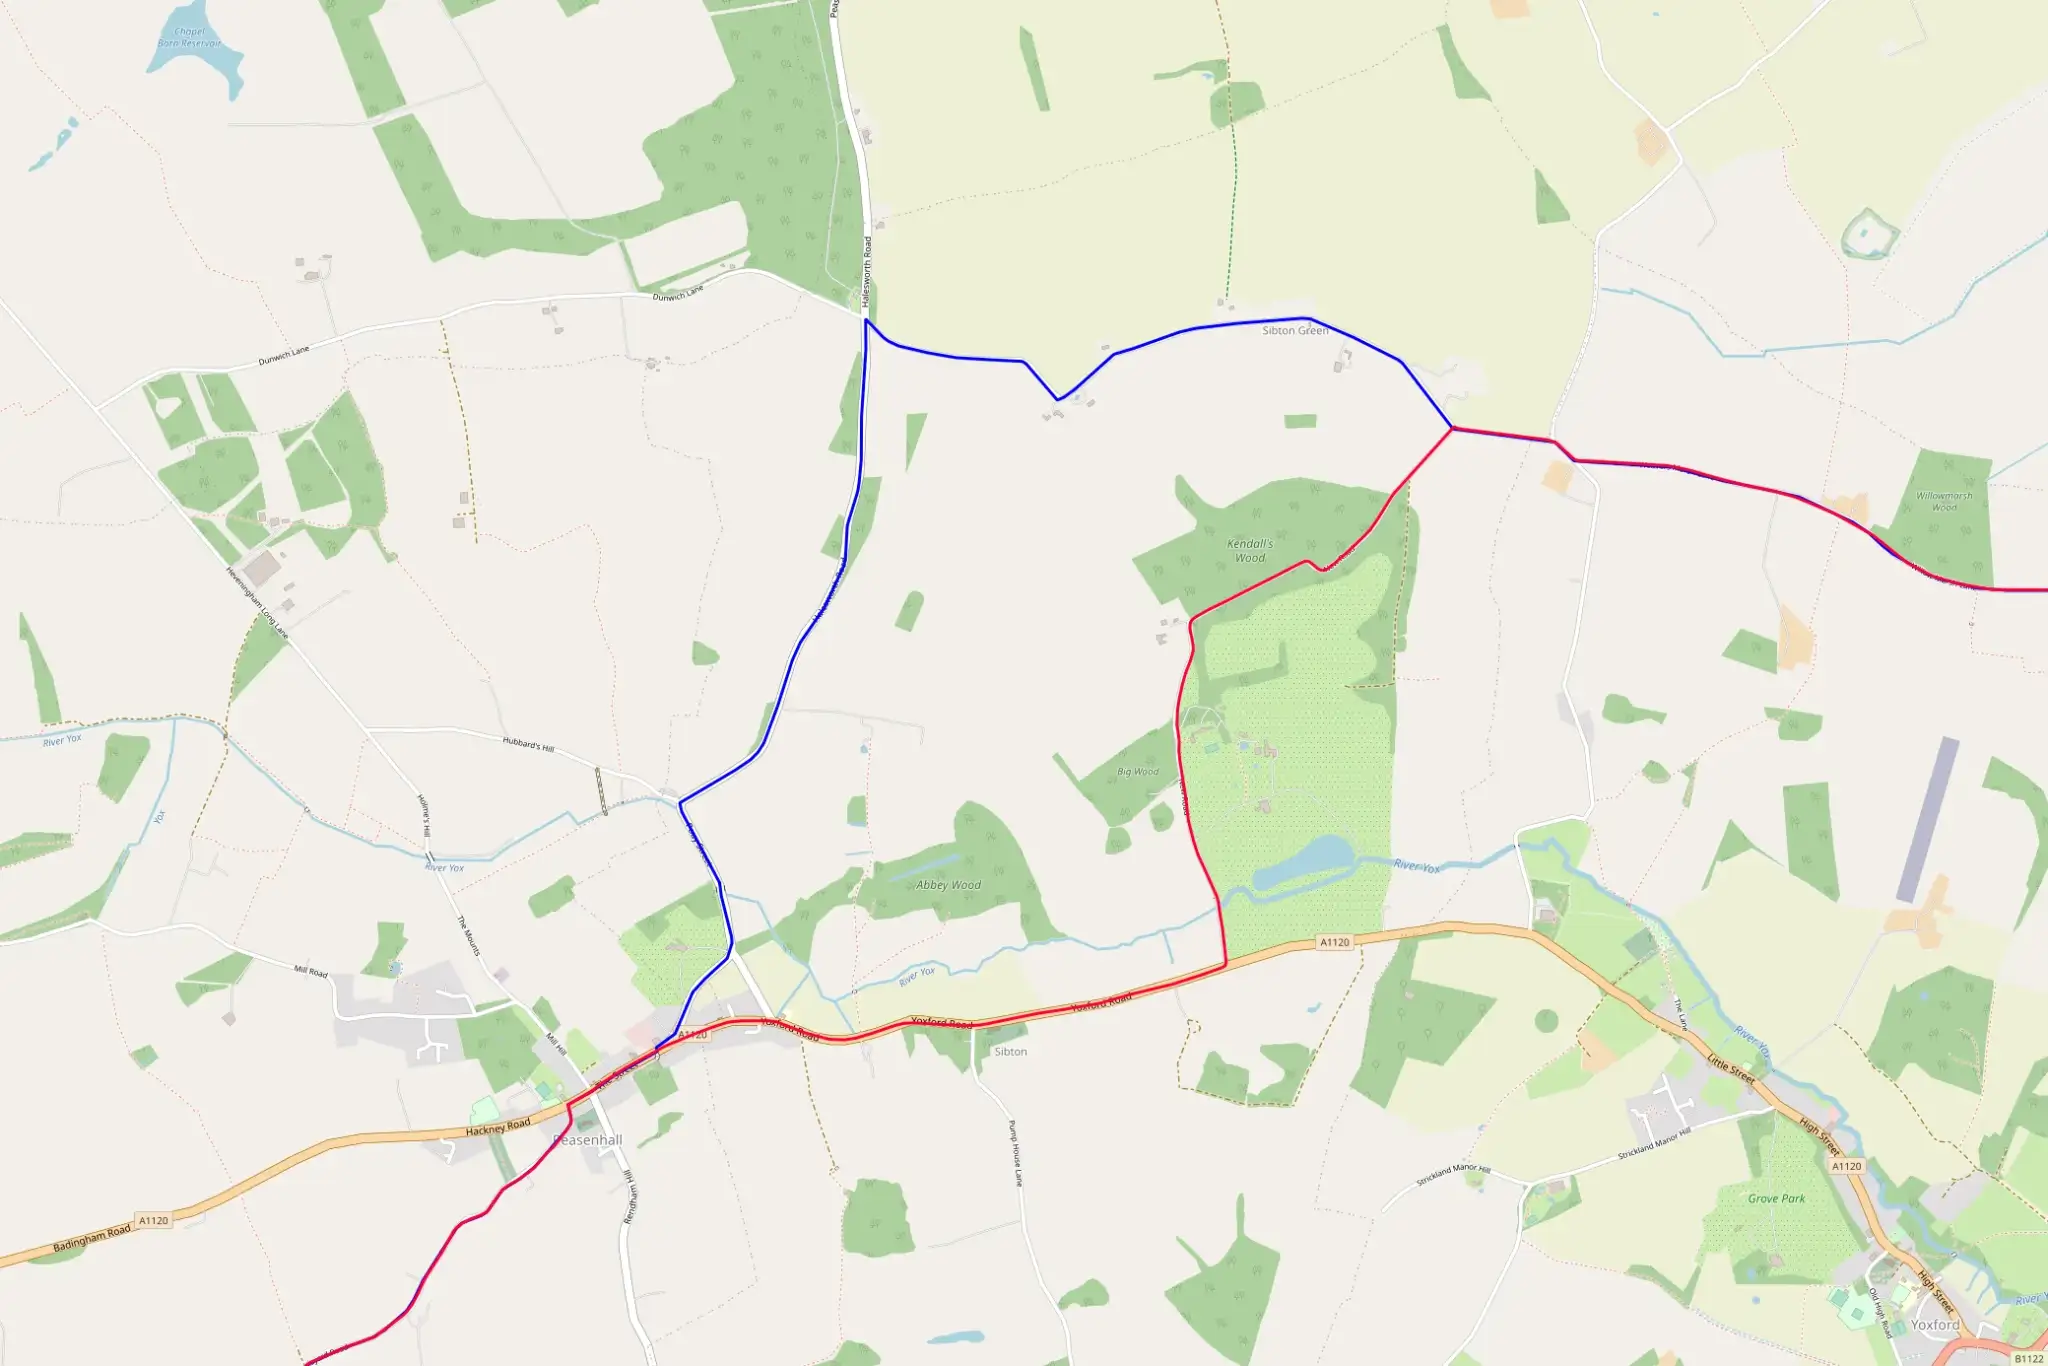 A section of map with two journeys marked. They fork and rejoin a few
kilometres later.